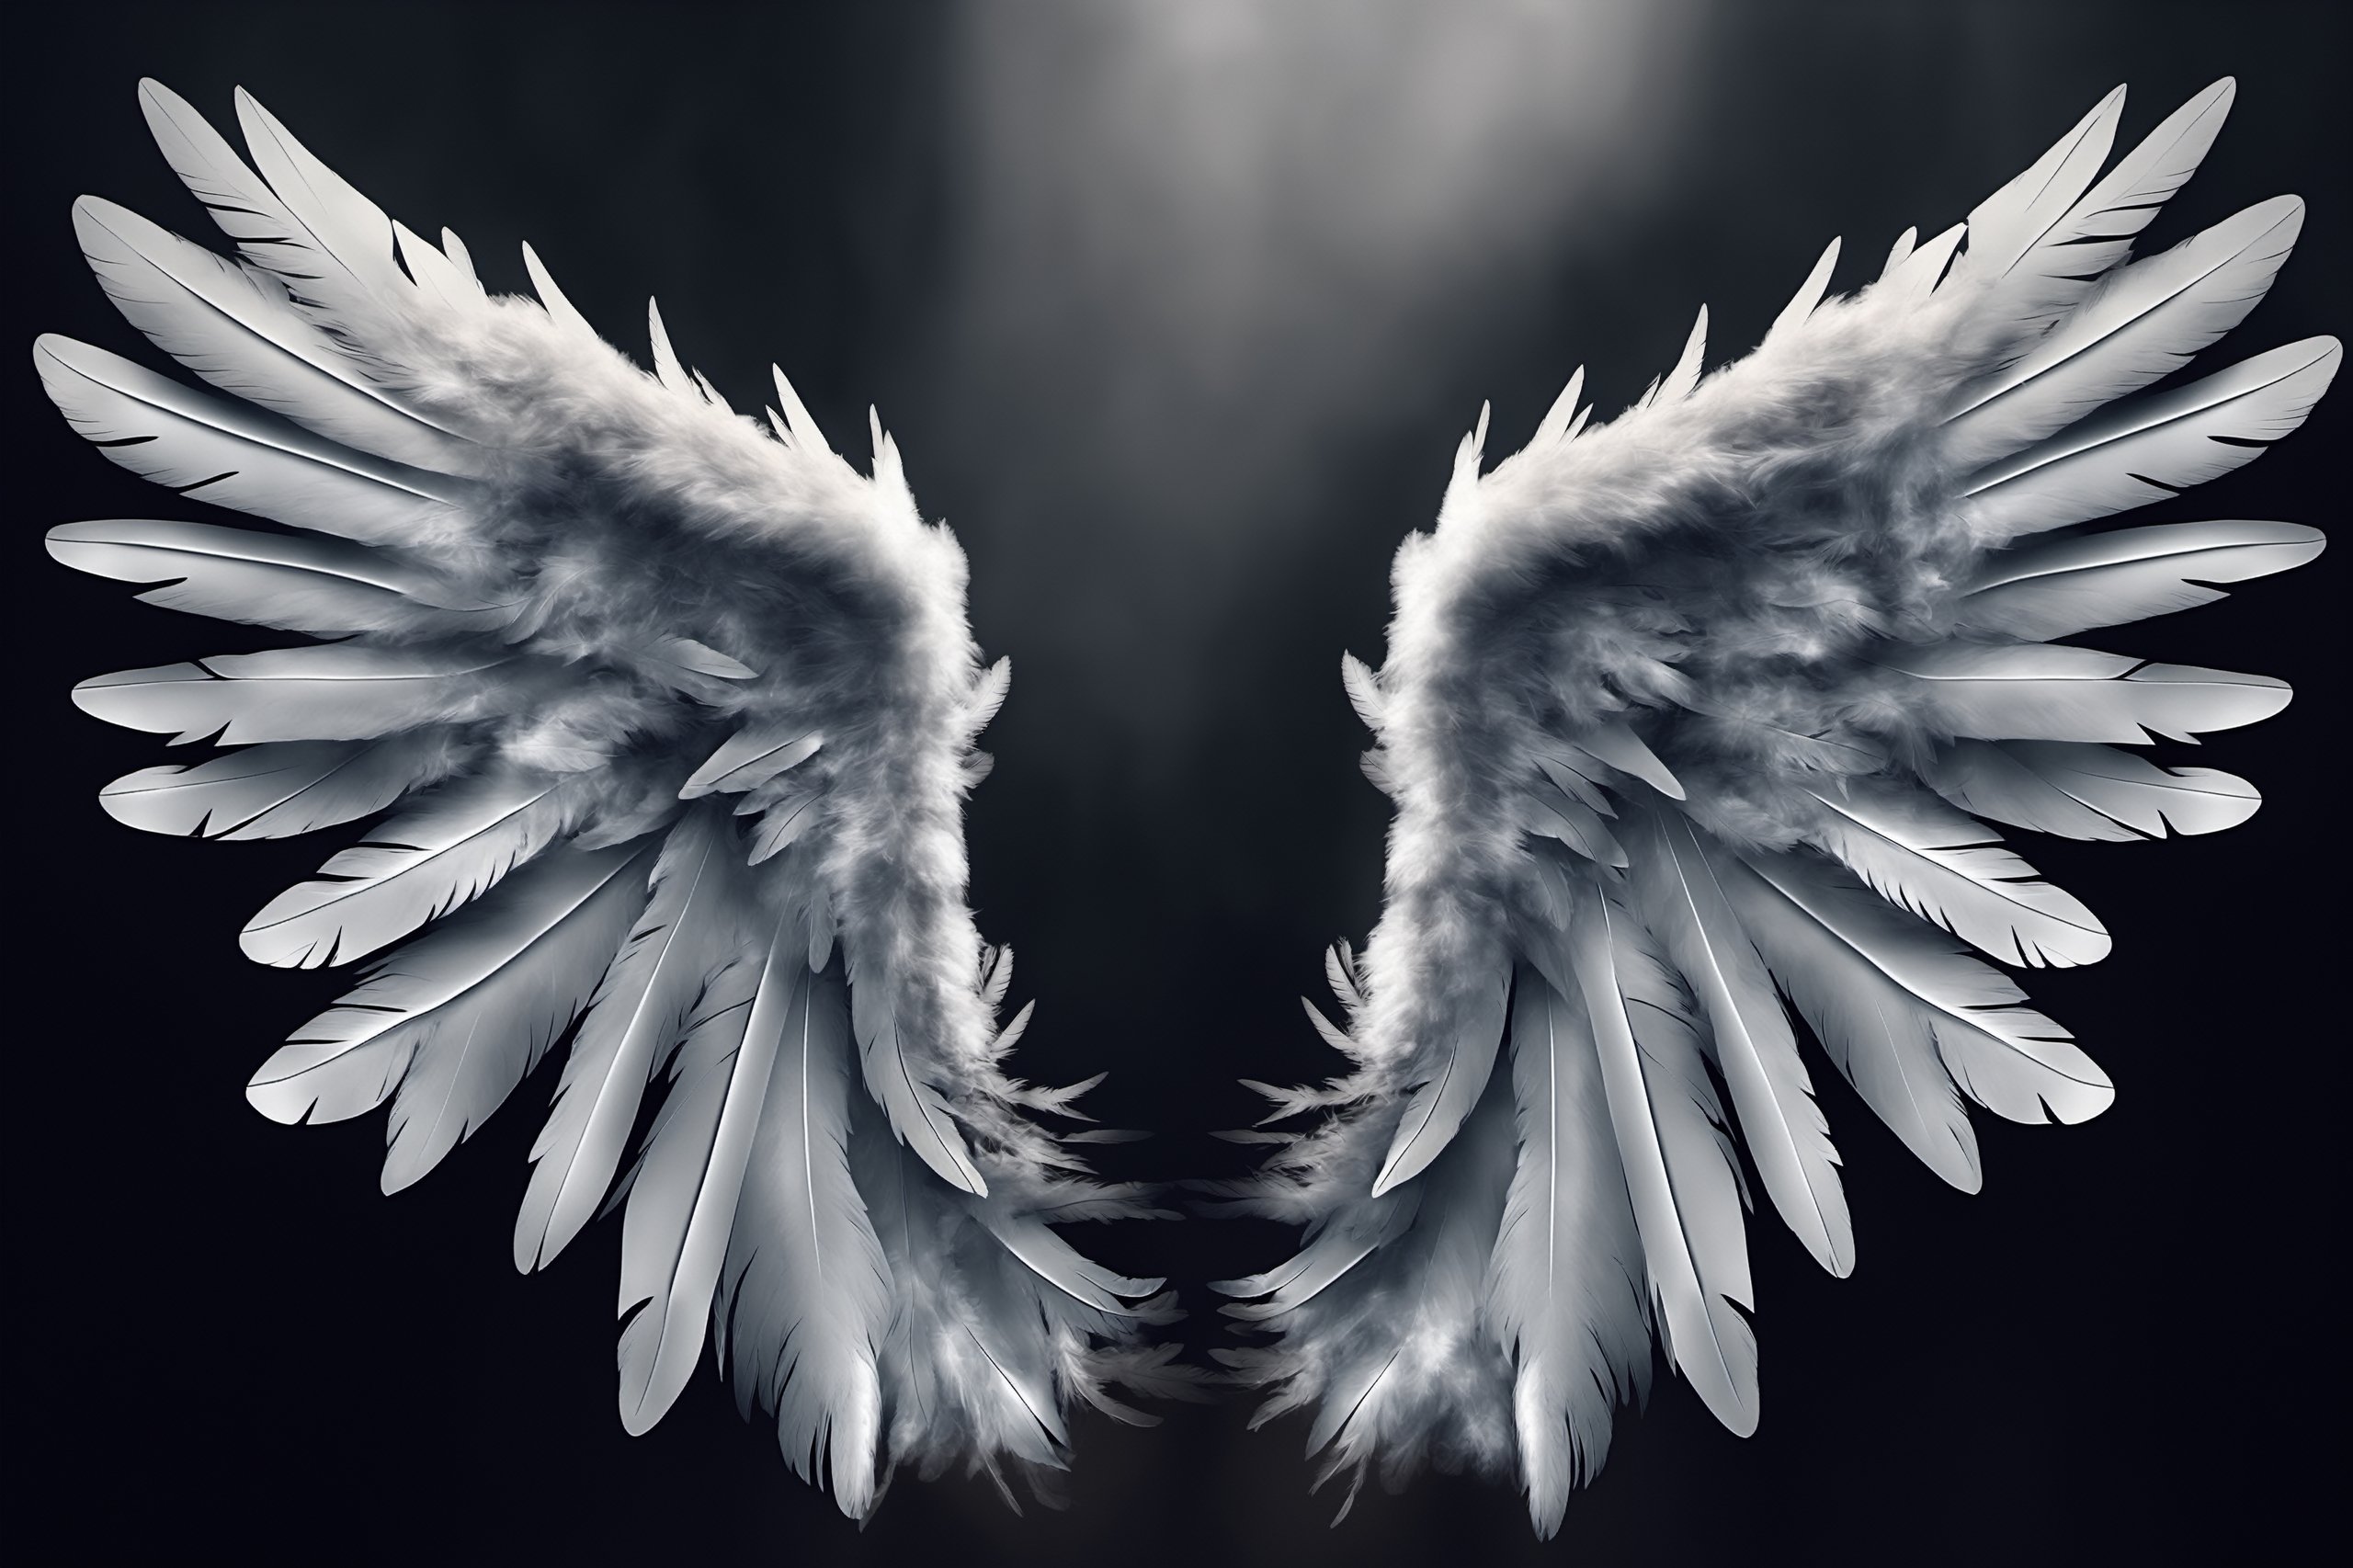 masterpiece, best quality, Arfang Photo realistic image of an angels wings with feathers